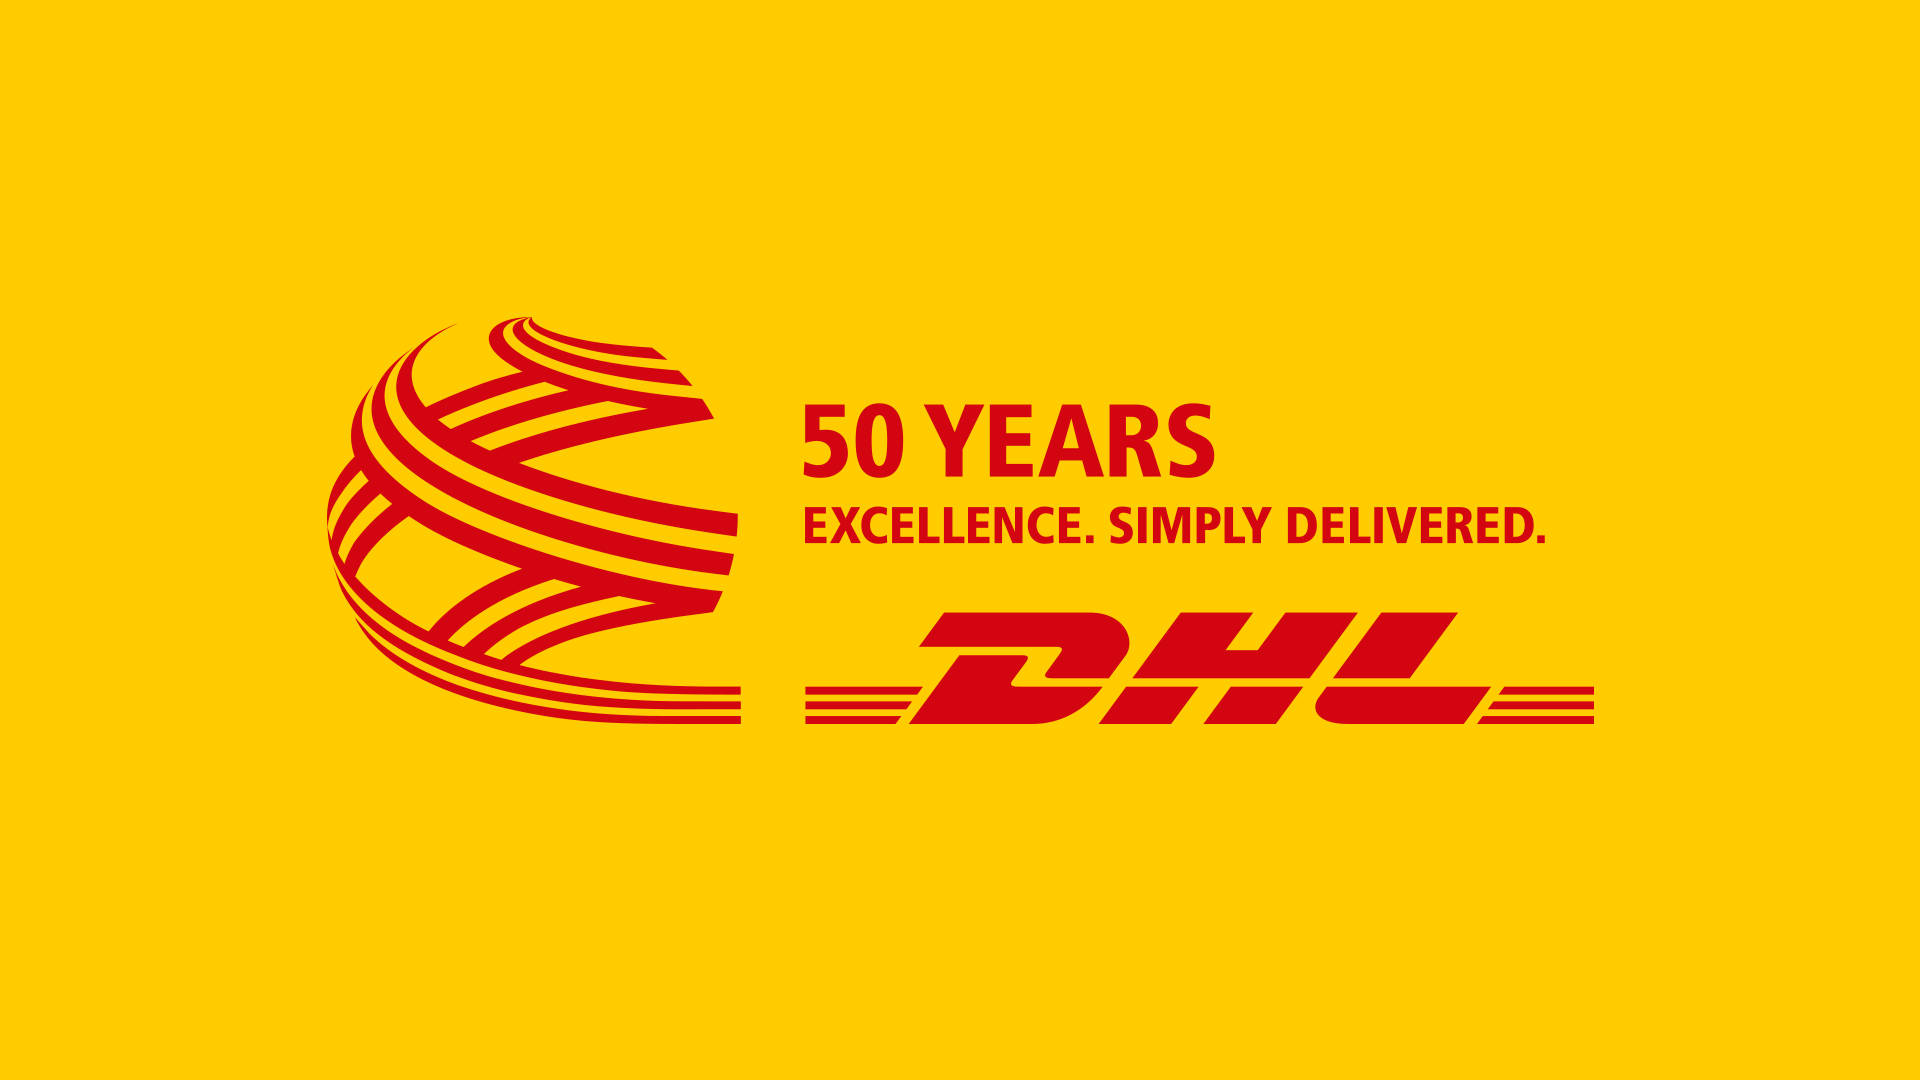 Dhl Golden Years Poster